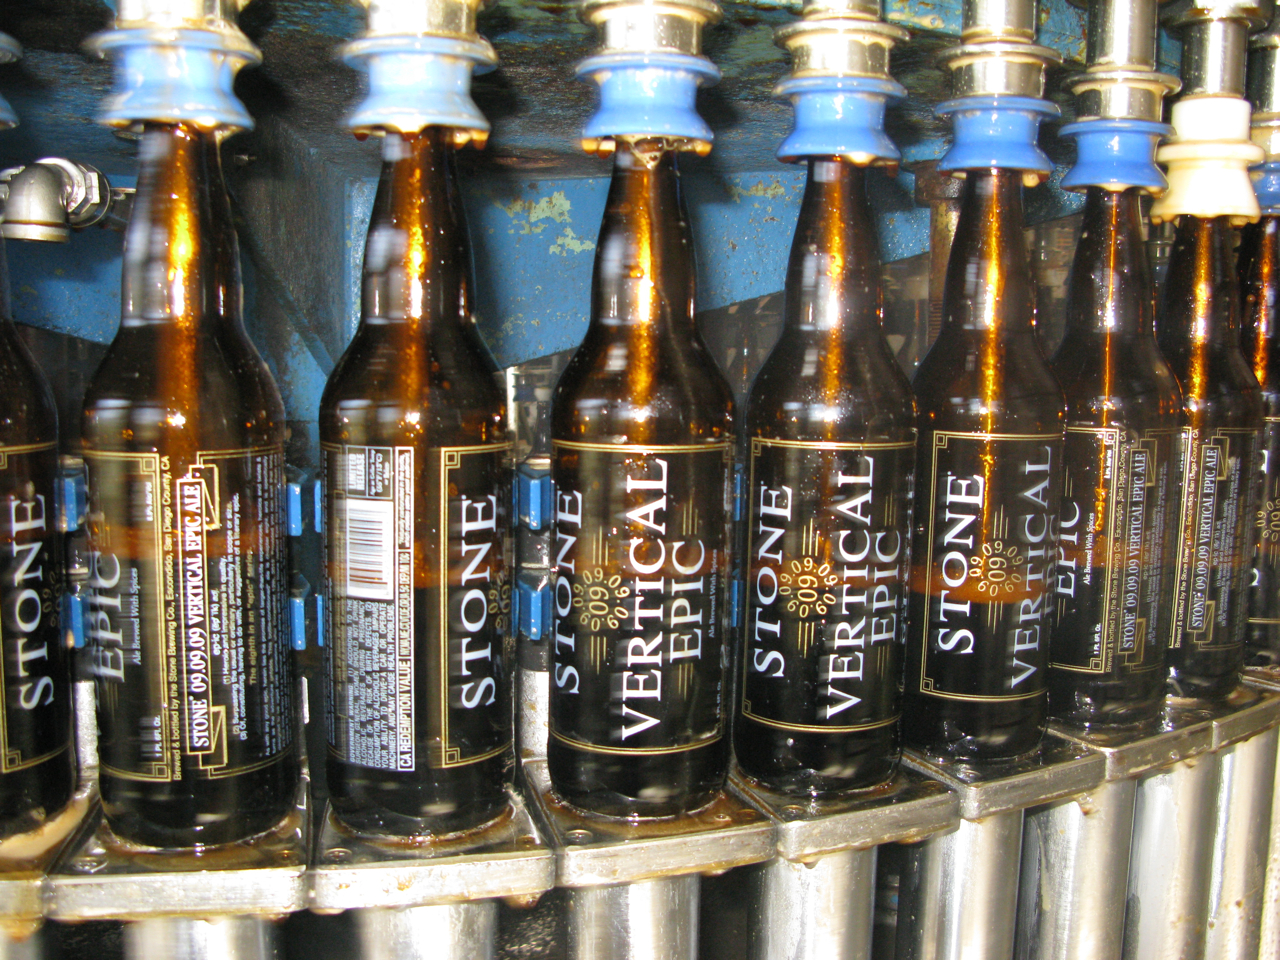 Bottles of Stone 09.09.09 Vertical Epic Ale going through the filler